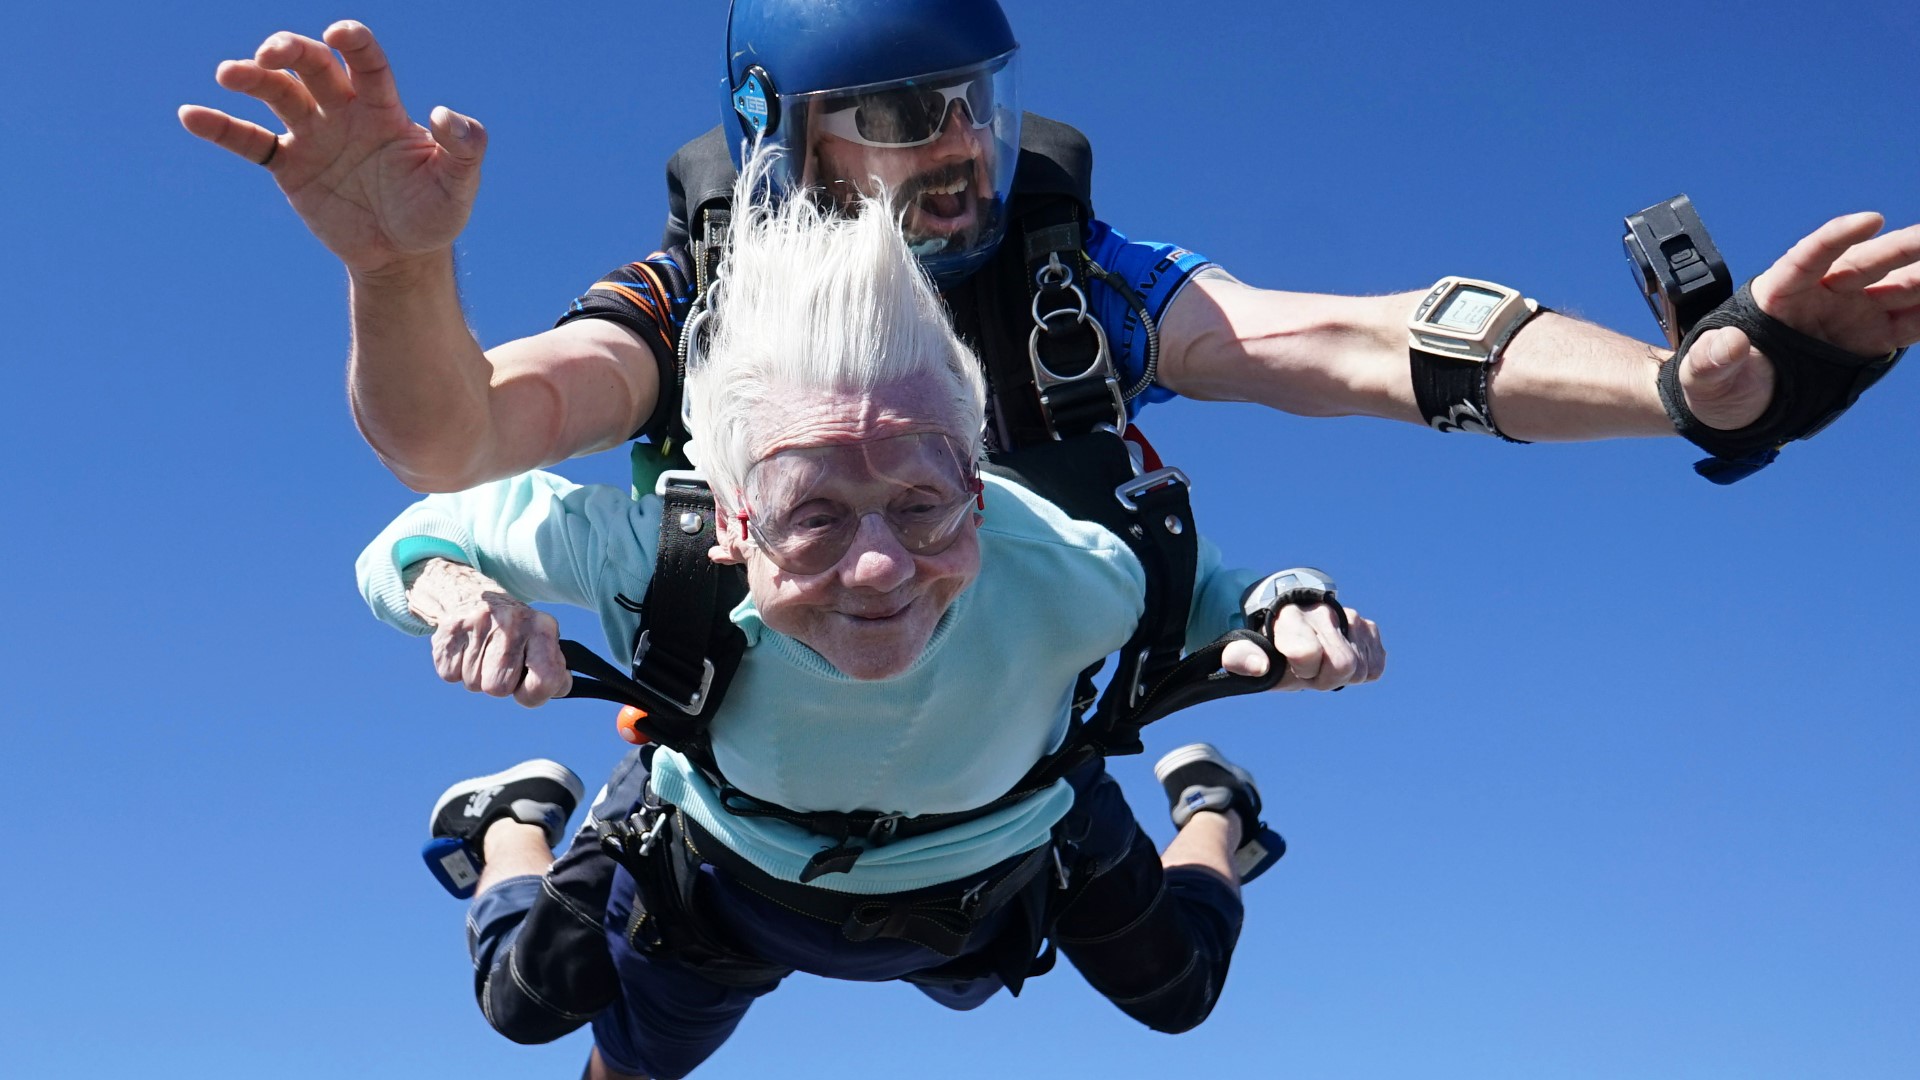 A 104-year-old Chicago woman is hoping to be certified as the oldest person to ever skydive after making a tandem jump from 13,500 feet in northern Illinois.